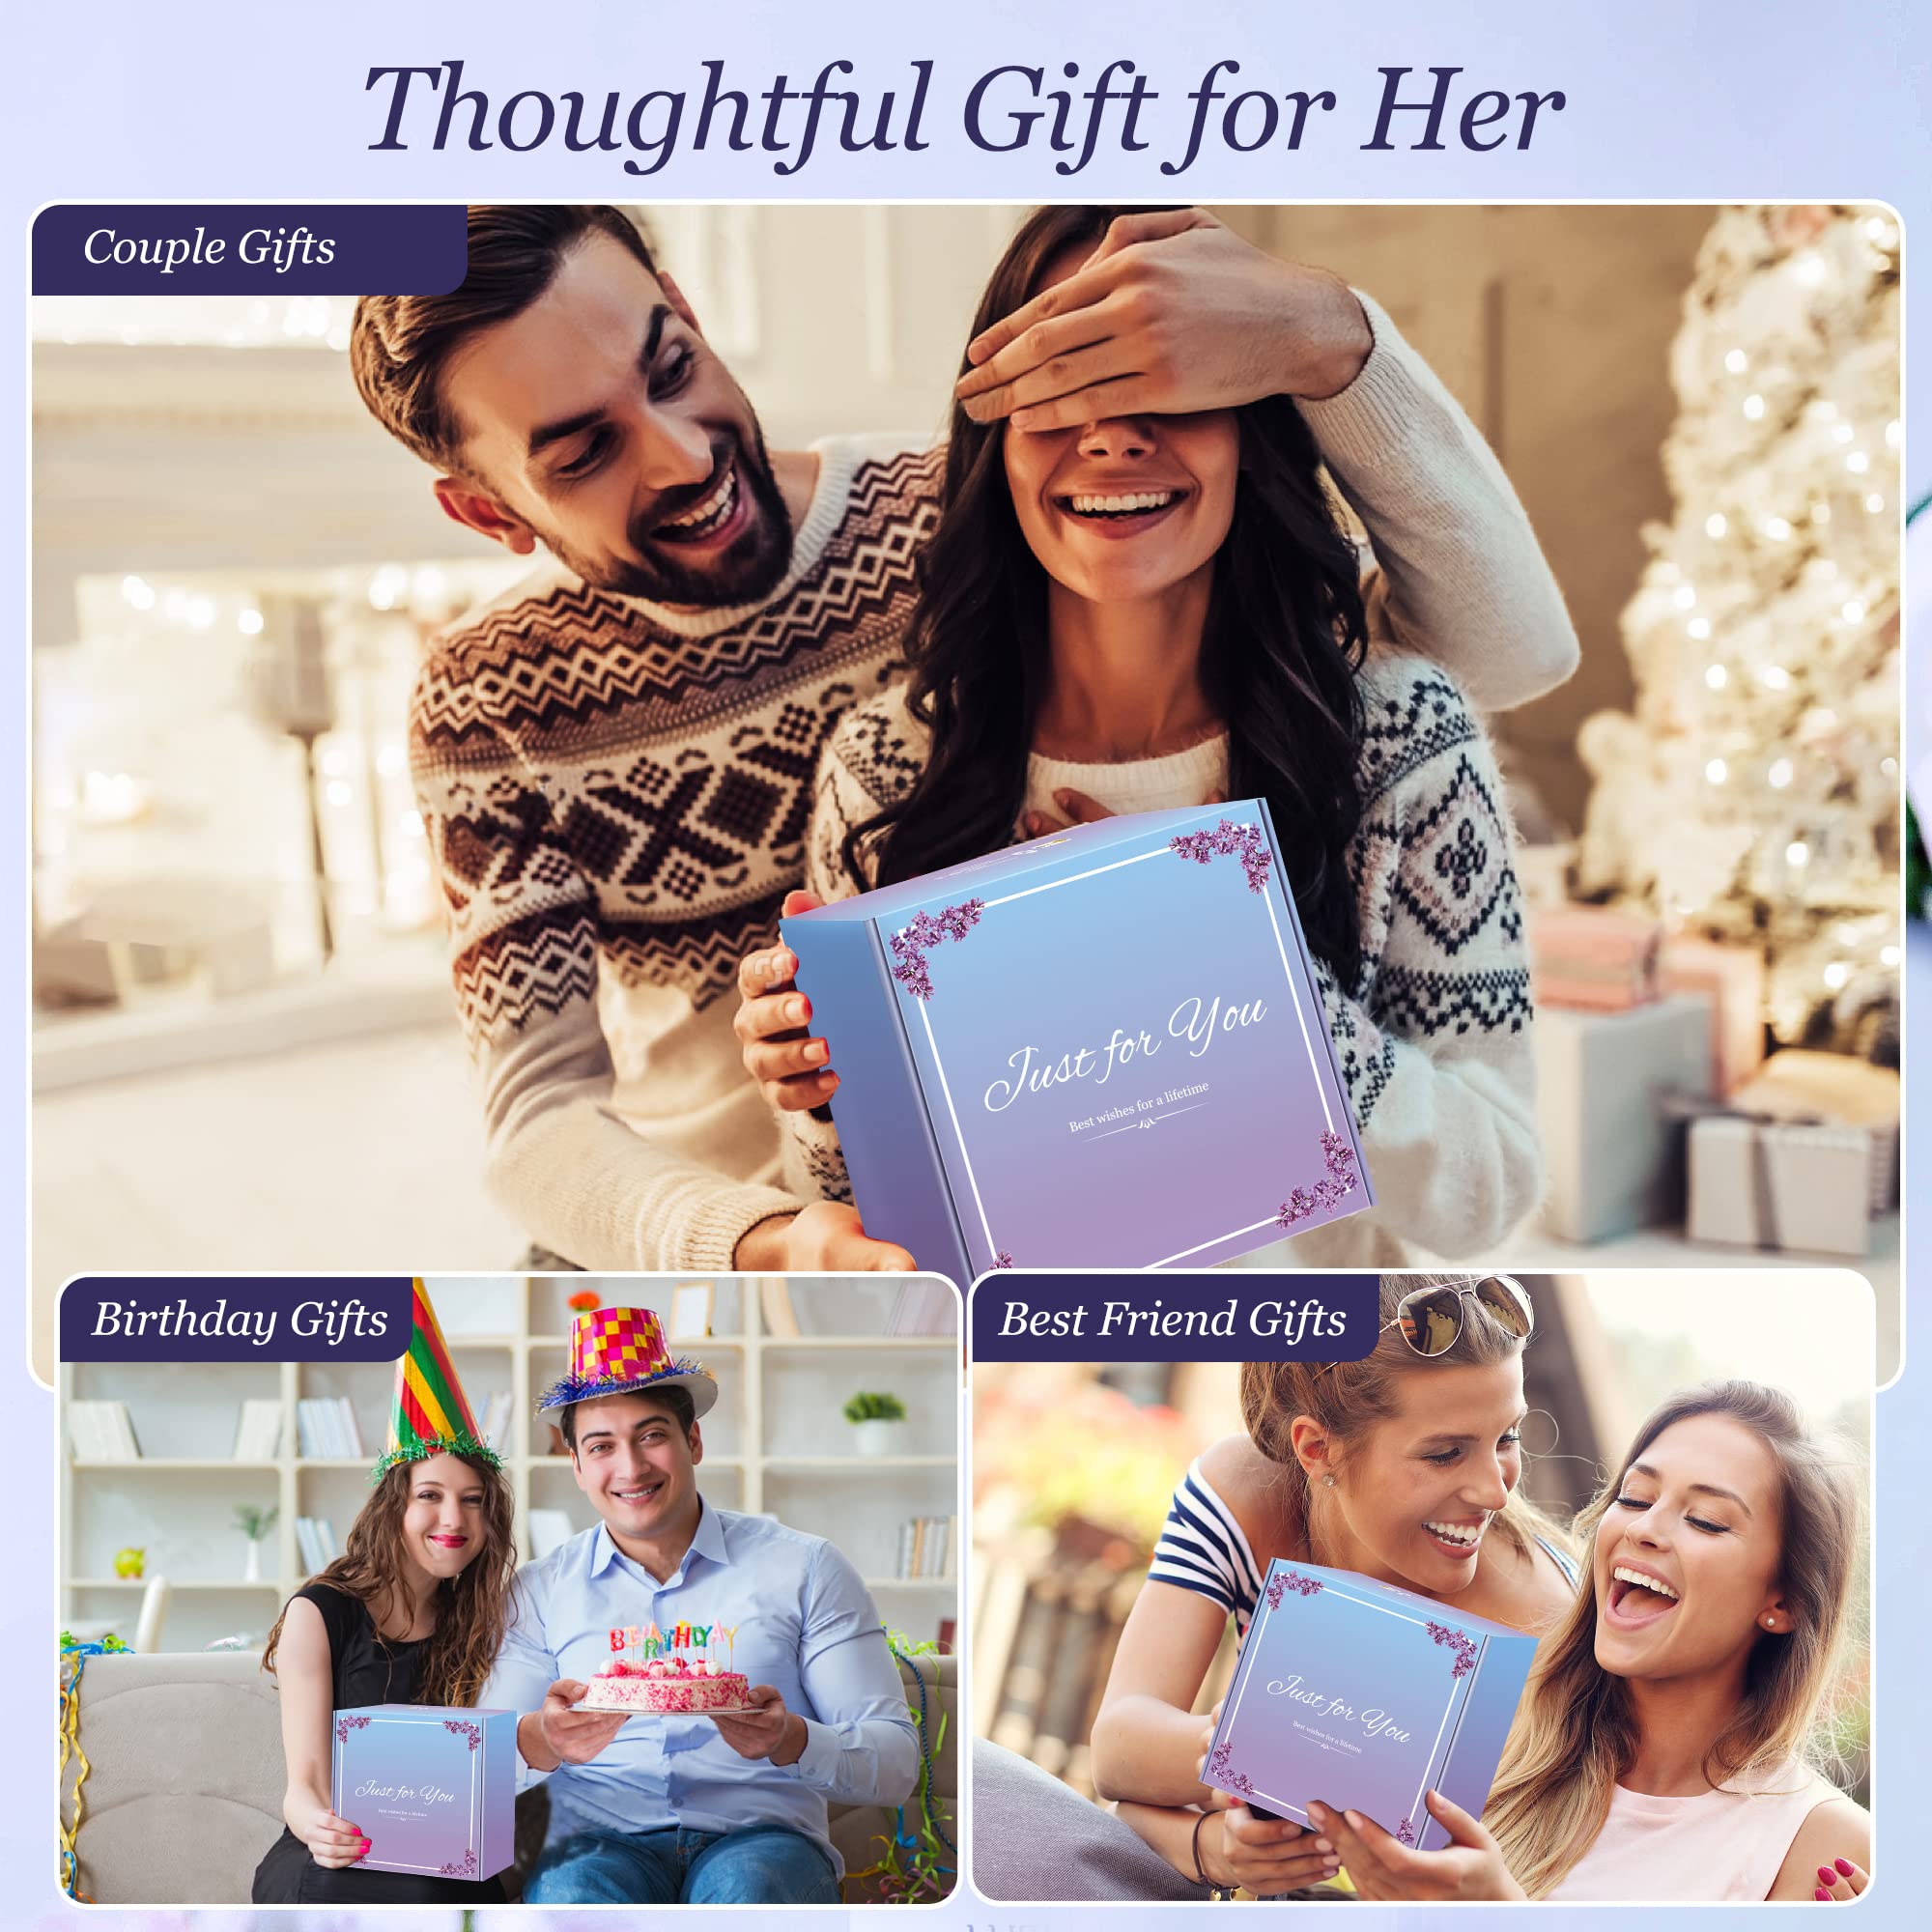 Loncaster Get Well Soon Gifts Care Package for Women Sick Friends, Sending Hugs Gifts for Her, After Surgery Feel Better Gifts Thinking of You Gifts for Women Cheer Up Gifts